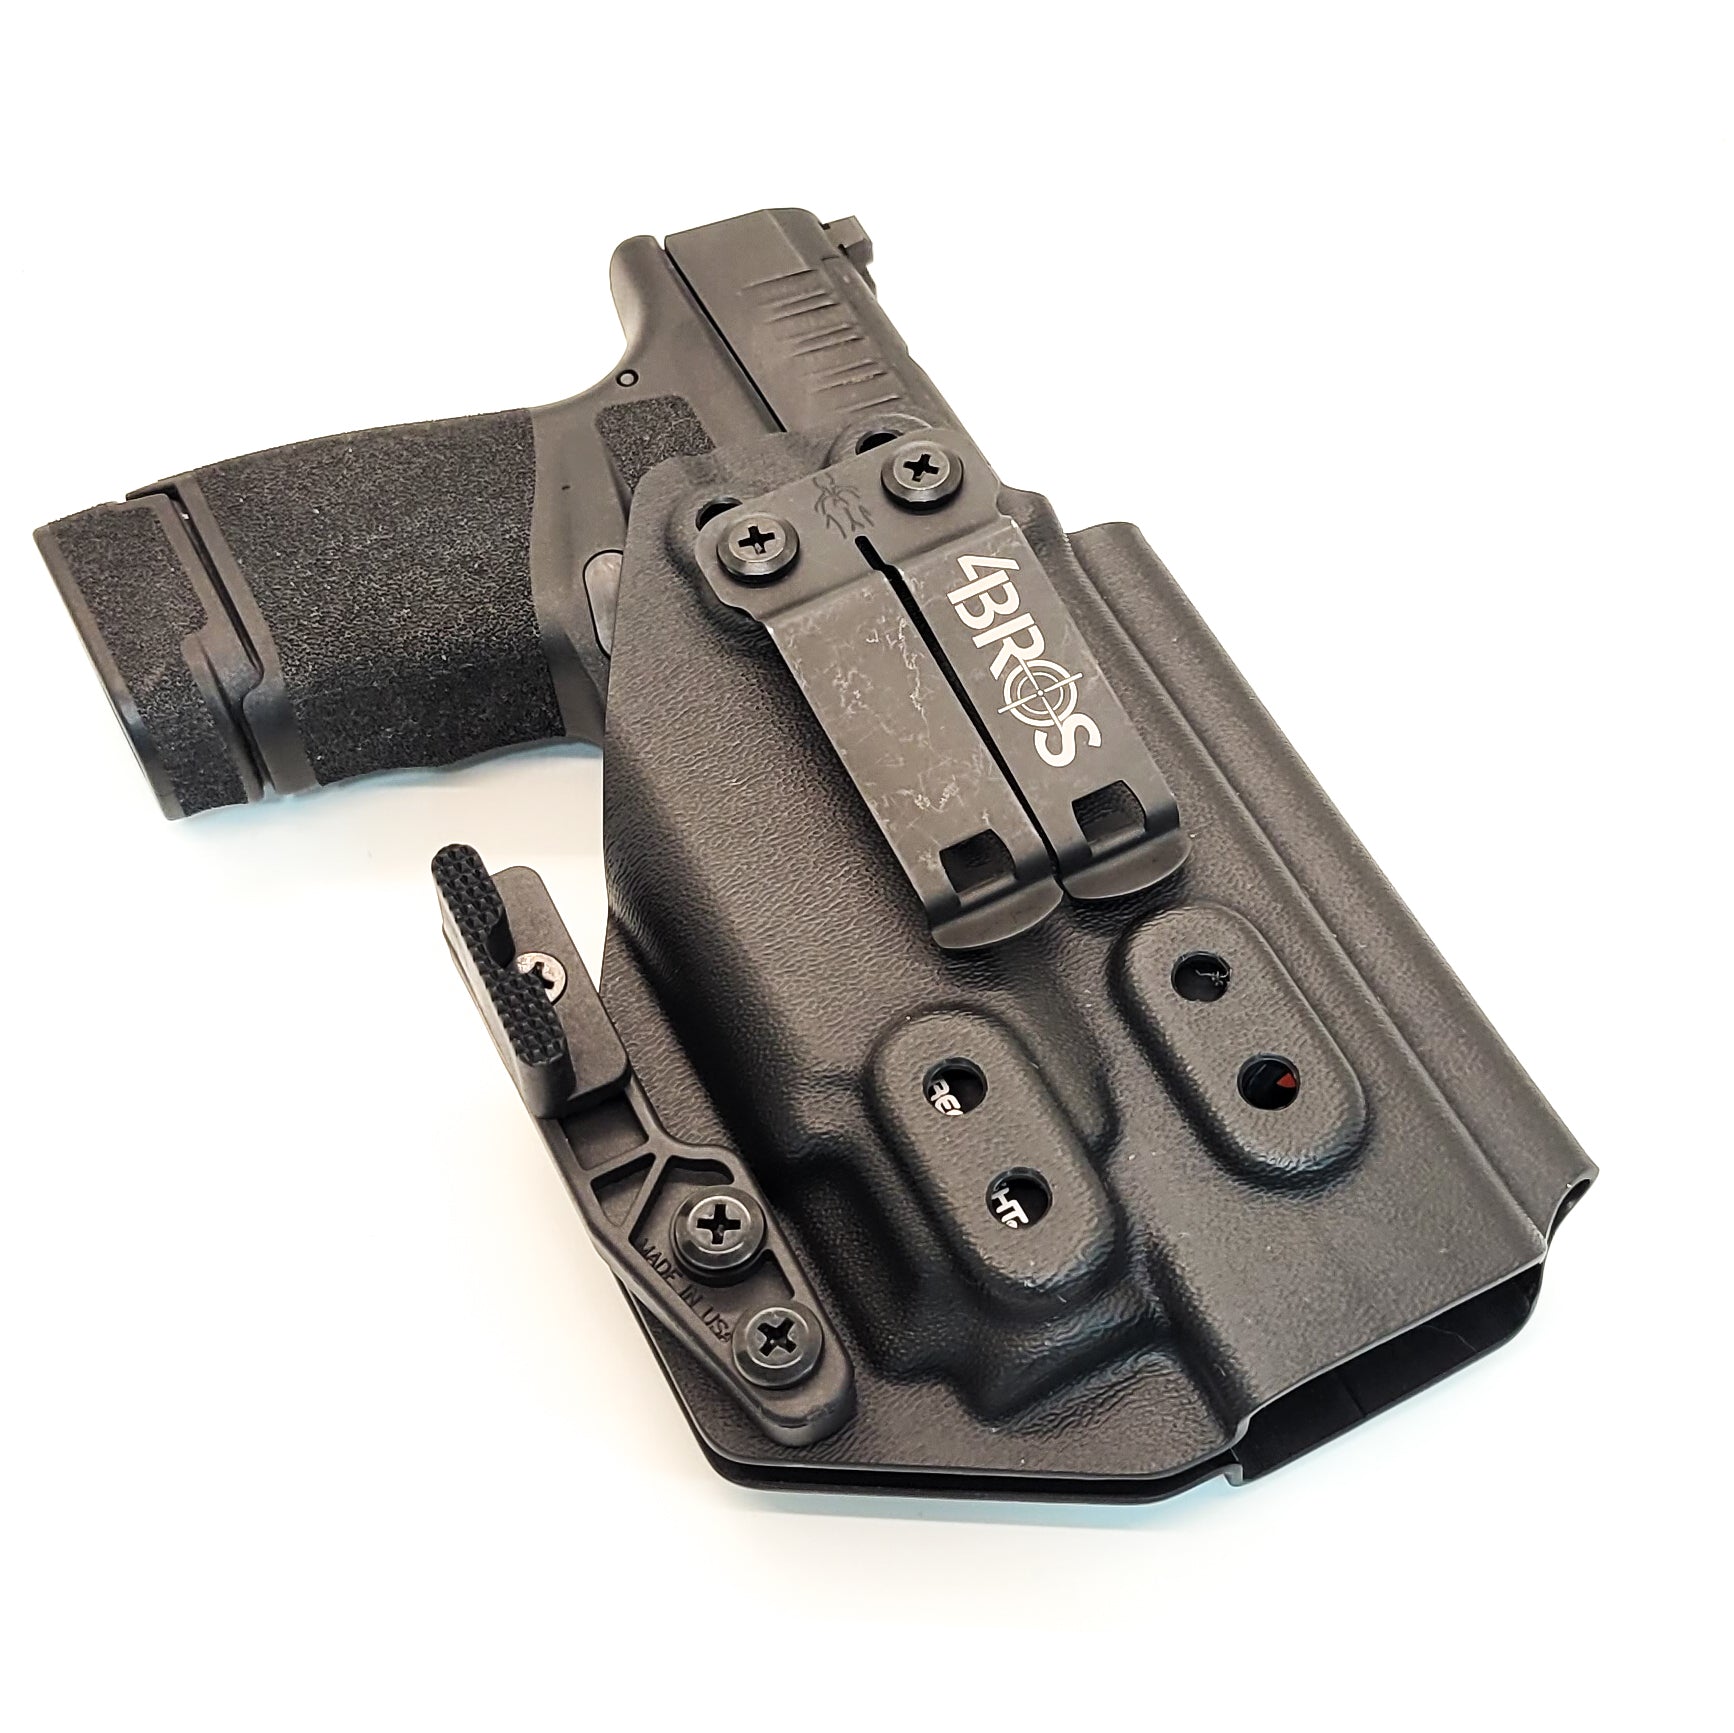 For the best, IWB AIWB Inside Waistband Kydex Holster designed to fit the Springfield Hellcat Mico Compact or Hellcat RDP pistol with Streamlight TLR-8 Sub, shop Four Brothers Holsters.  Full sweat guard, adjustable retention, open muzzle for threaded barrels cleared and for red dot sights. Made in the USA. 